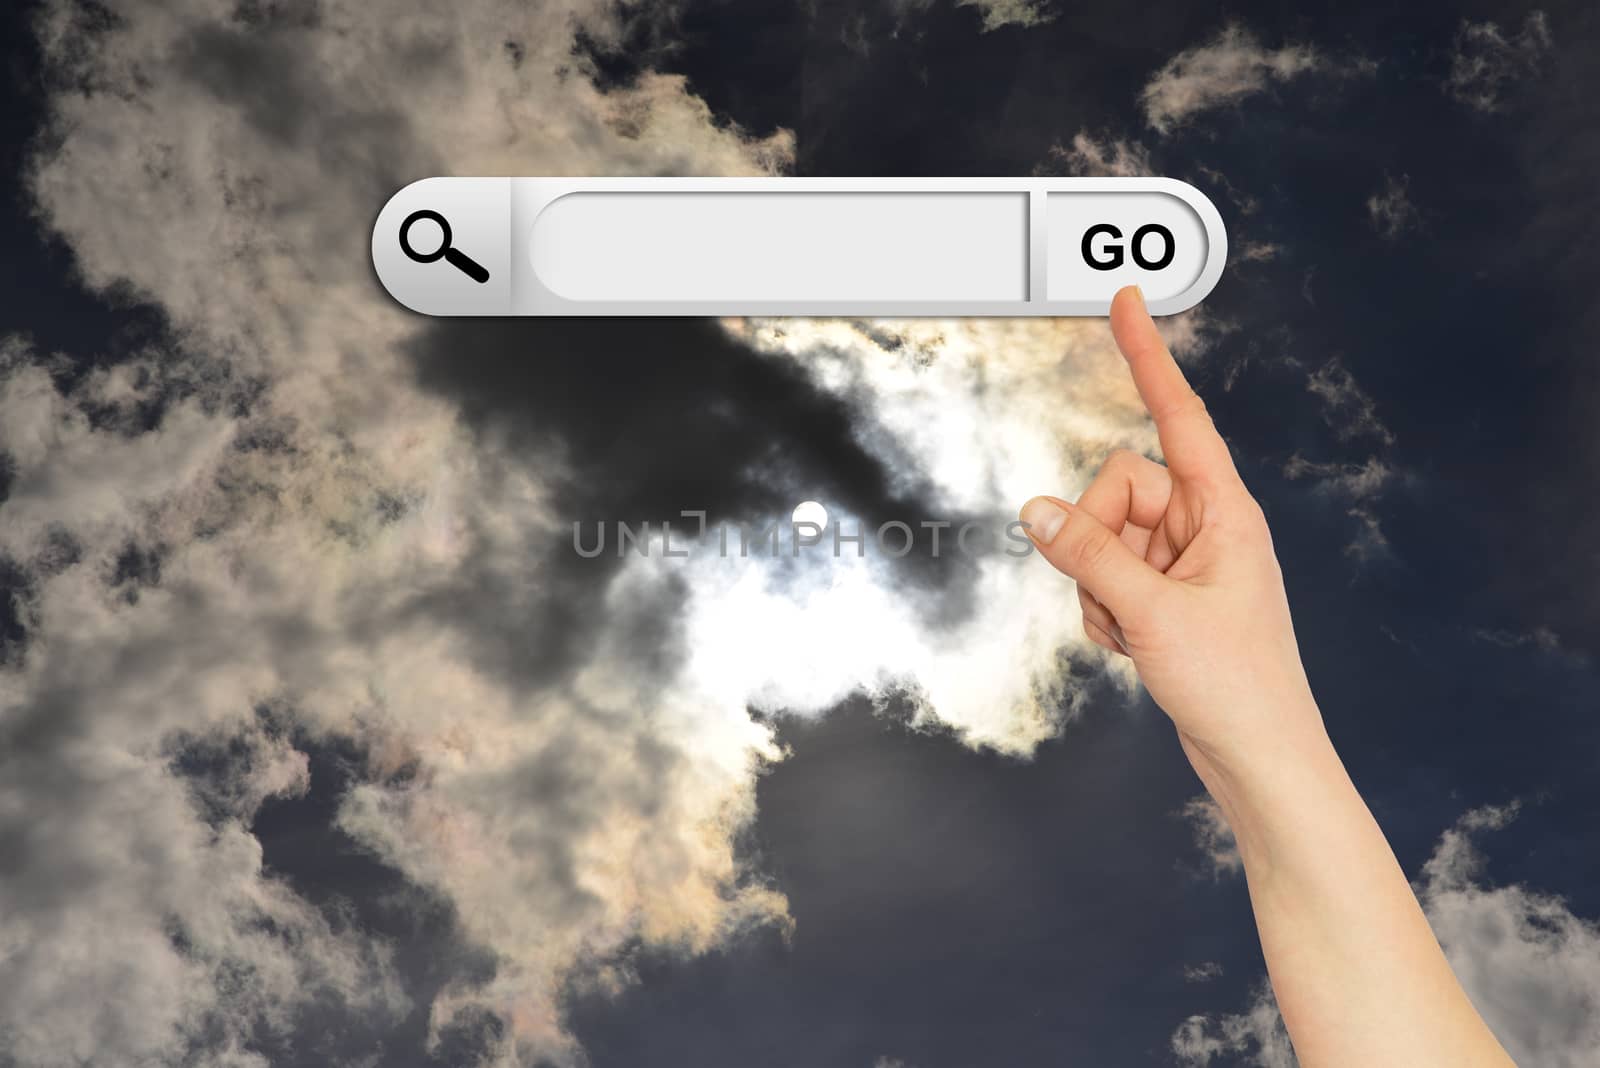 Human hand indicates the search bar in browser. Sunset or sunrise on background